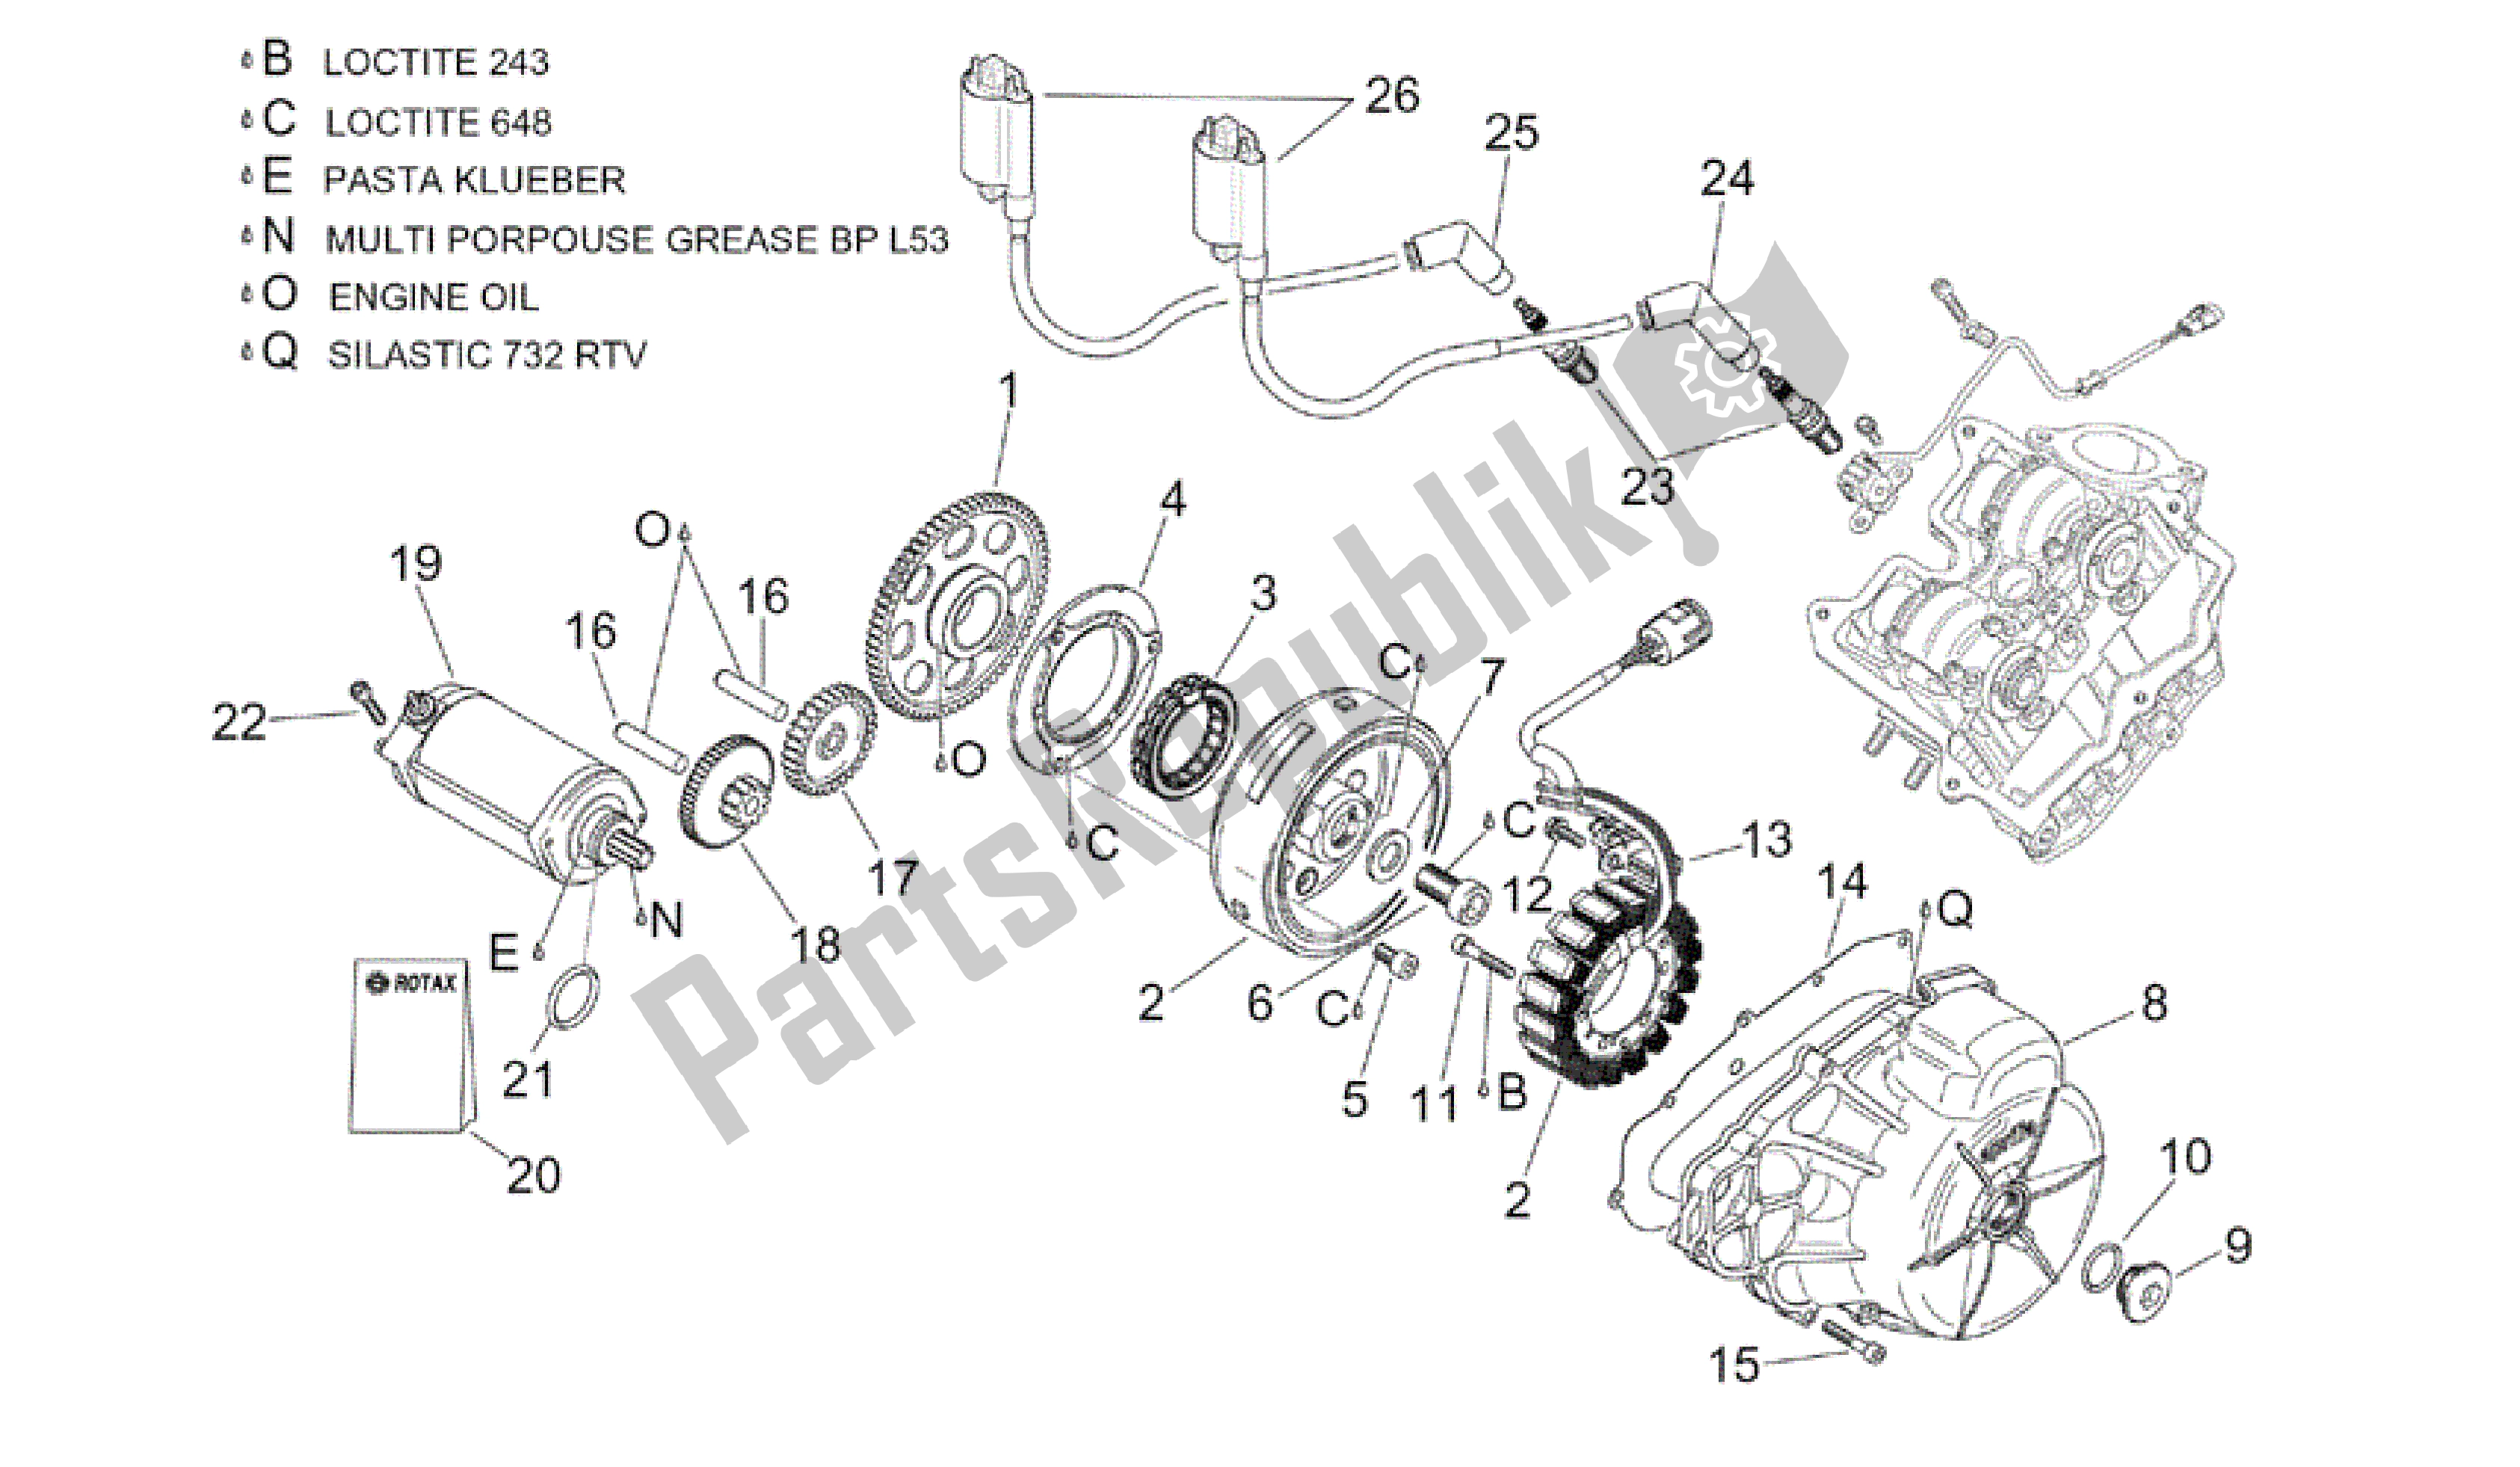 All parts for the Ignition Unit of the Aprilia RSV Tuono RS 1000 2004 - 2005